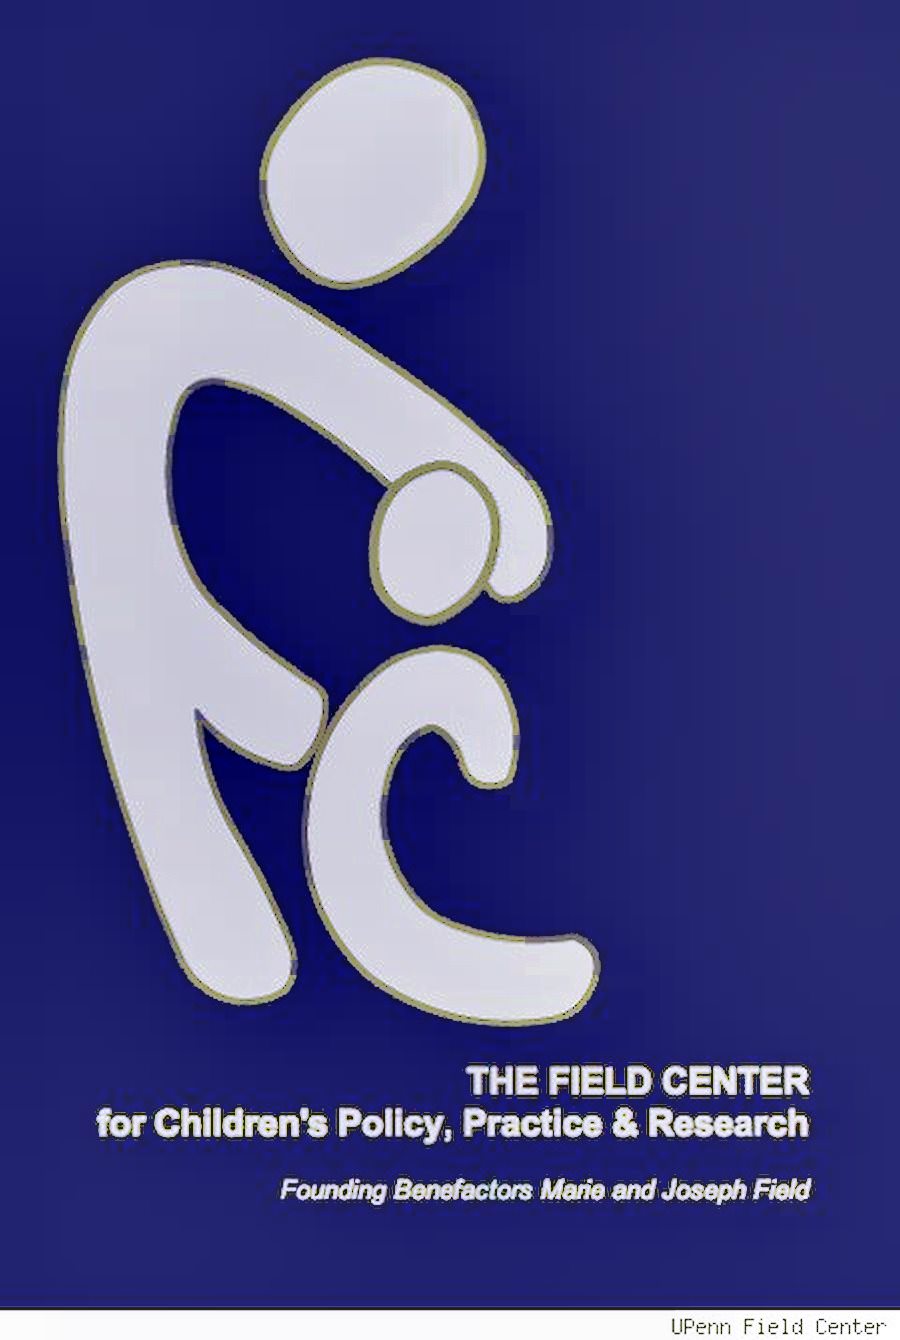 The field center for children’s policy, practice & research